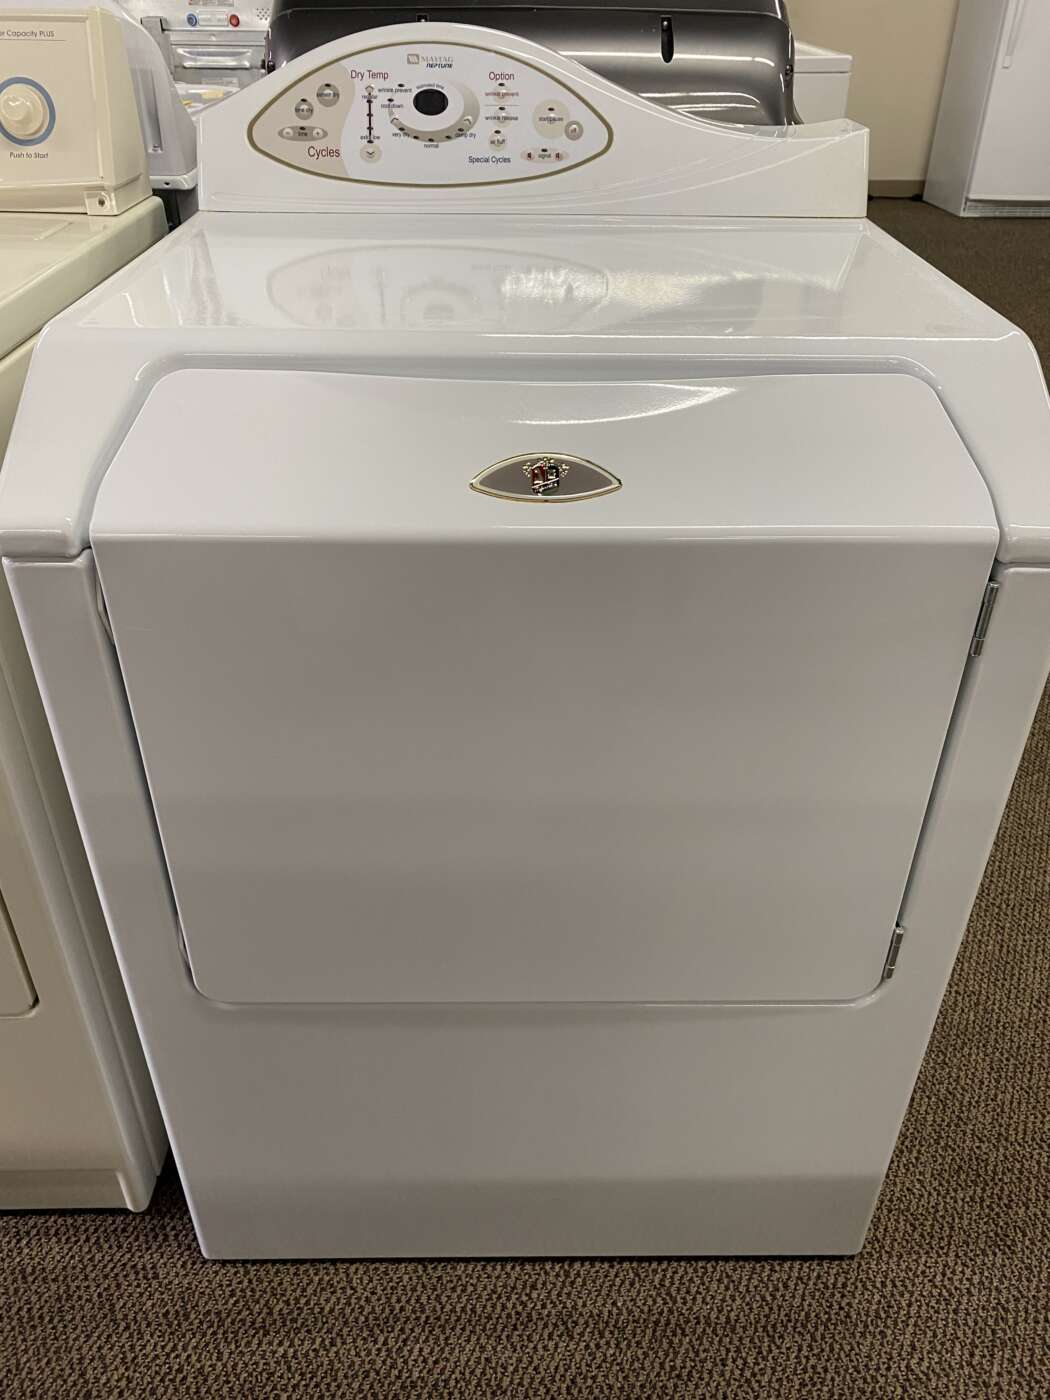 Reconditioned CLASSIC MAYTAG 6.0 Cu. Ft. Electric Dryer – White